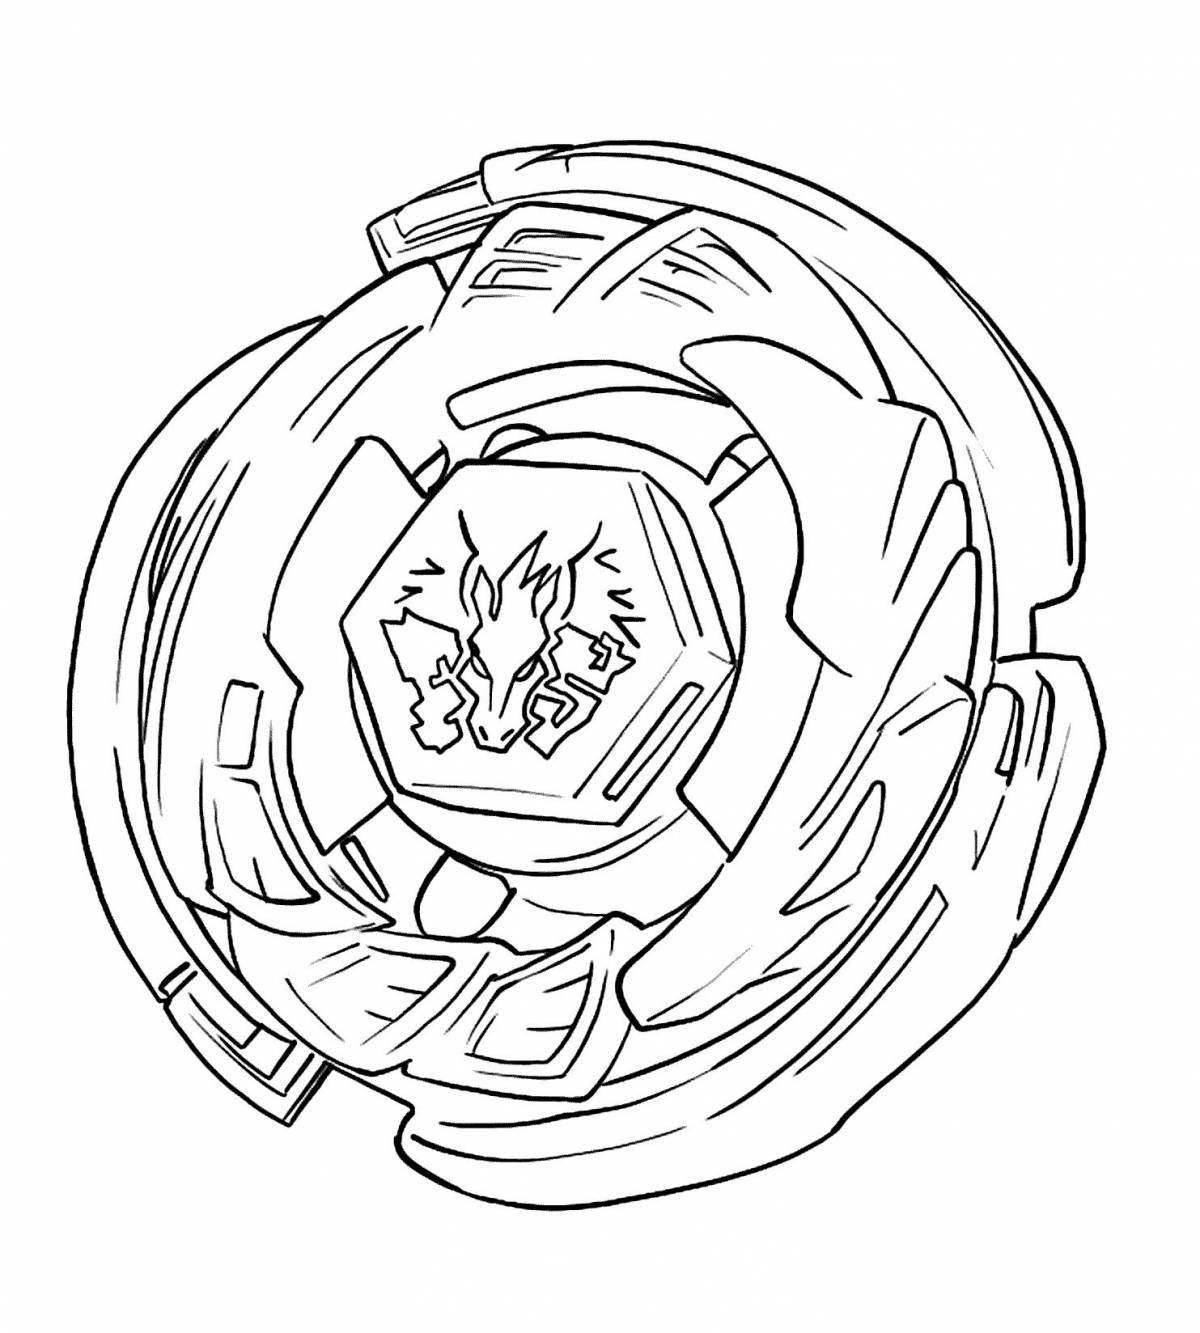 Colorful beyblade coloring page